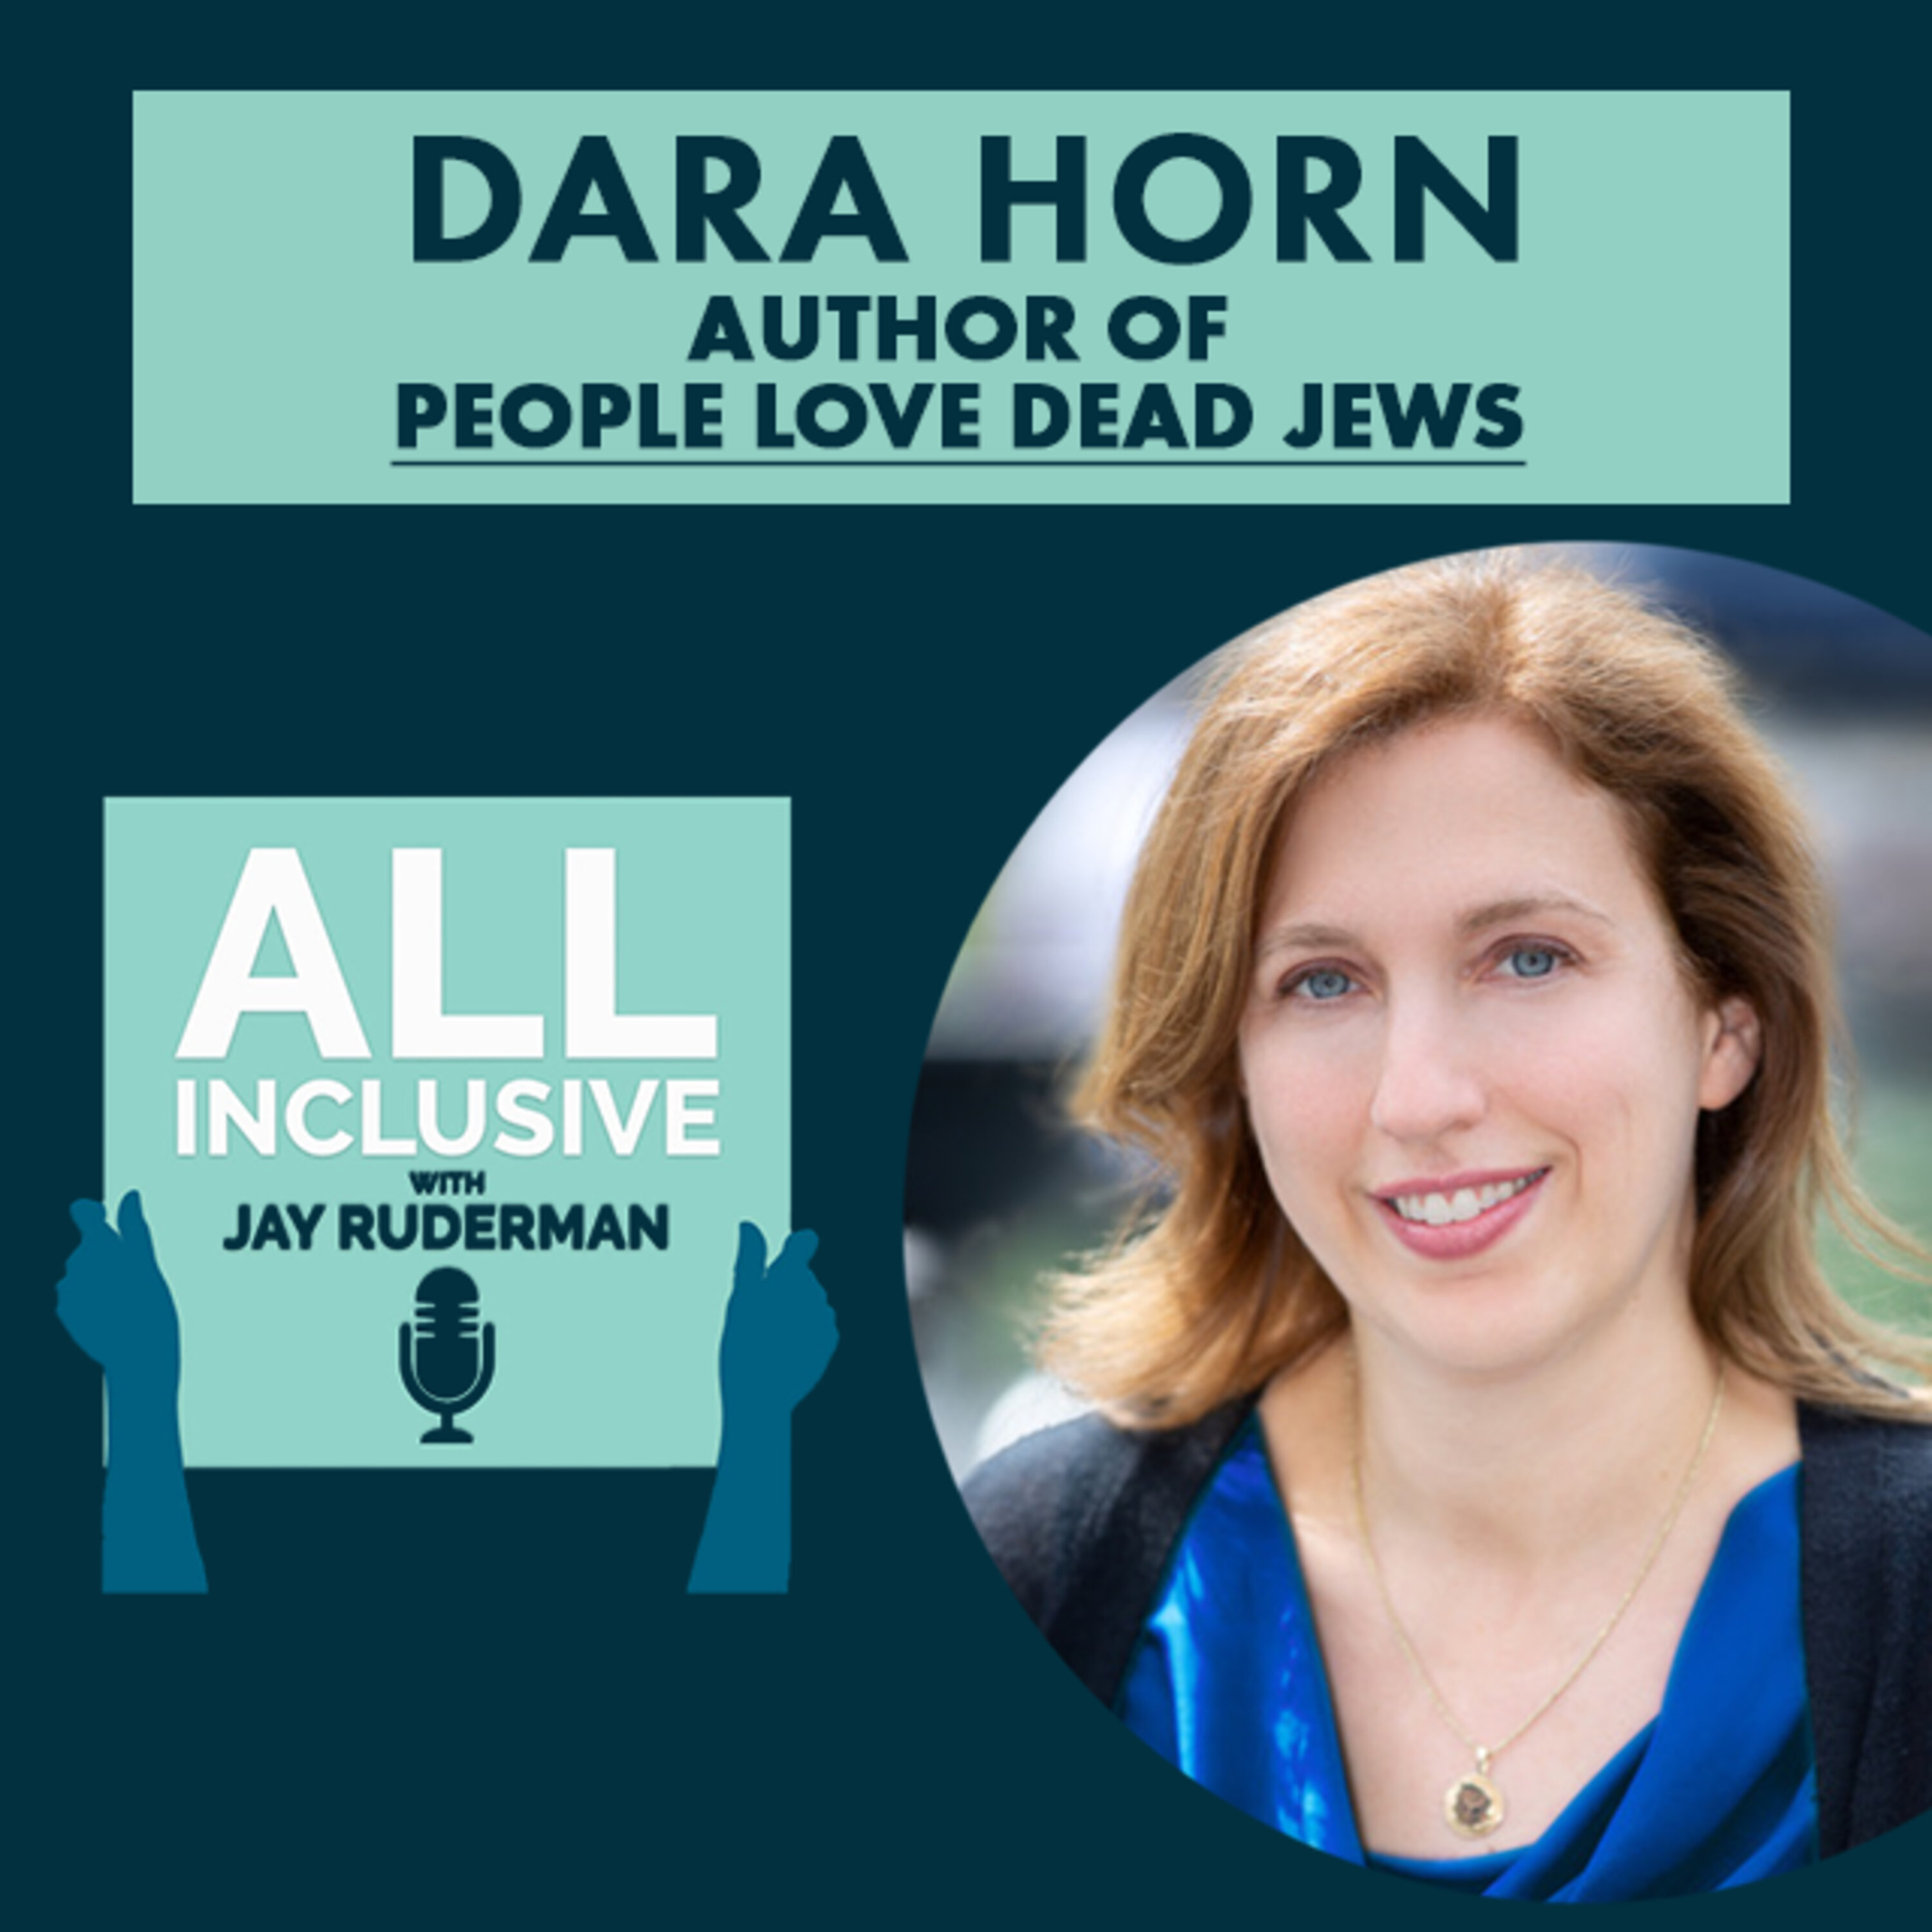 Dara Horn – Author of 'People Love Dead Jews'